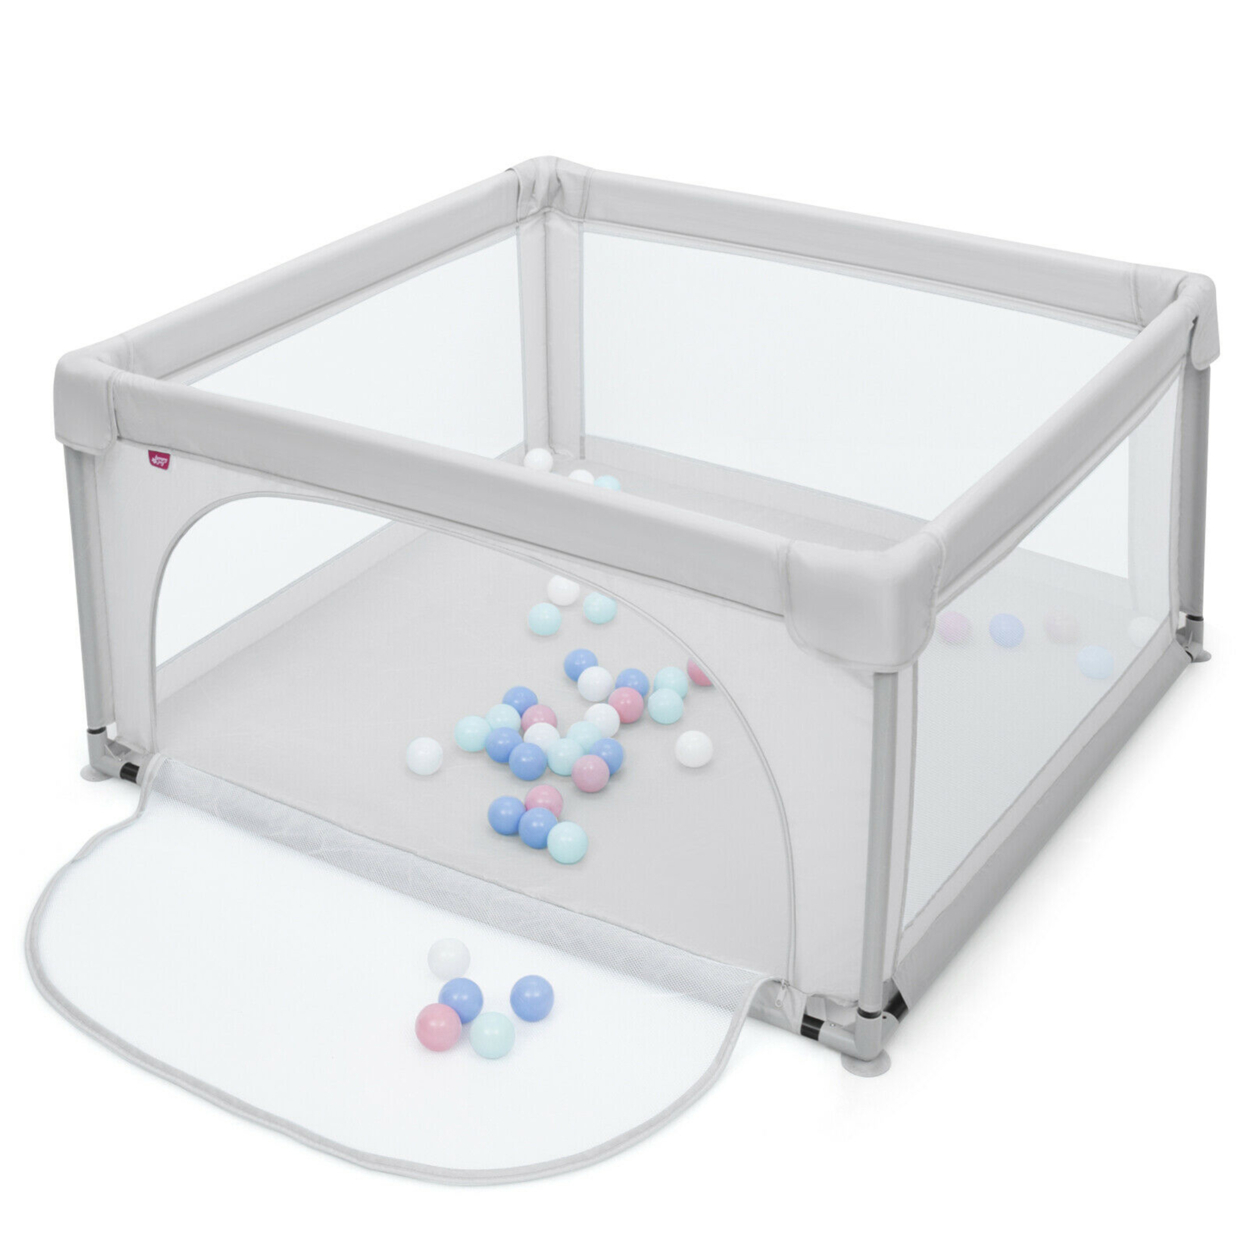 Baby Playpen Infant Large Safety Play Center Yard W/ 50 Ocean Balls - Grey